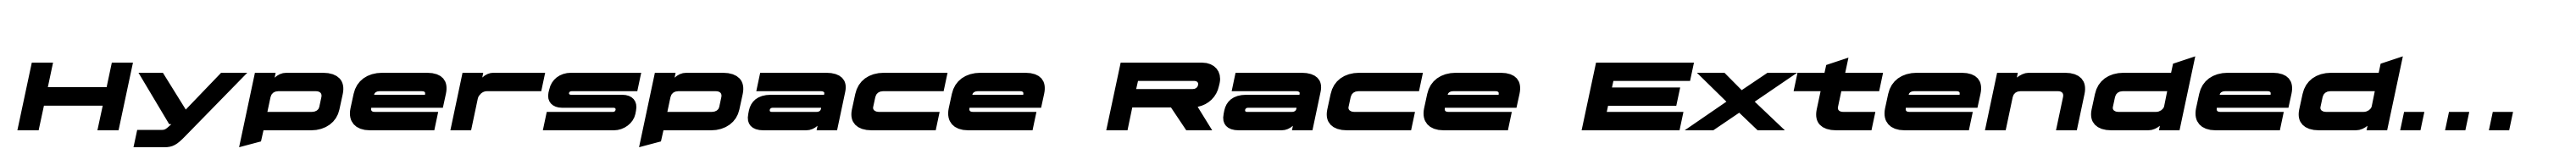 Hyperspace Race Extended Heavy Italic